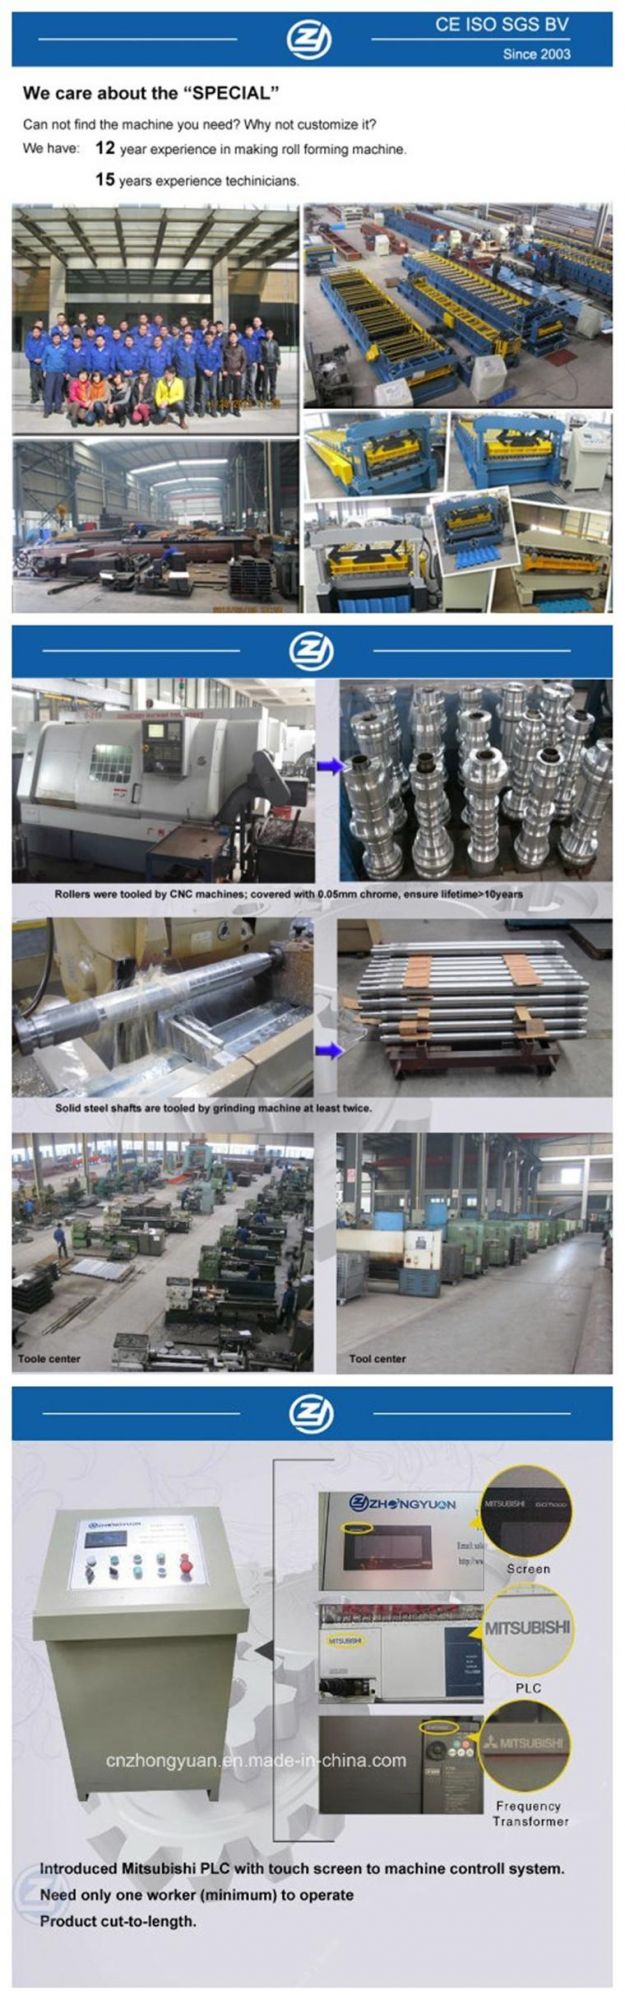 China C8 C18 C21 C25 C35 Russian Model Aluminum Metal Roofing Iron Sheets Shingle Making Glazed Tile Roll Forming Machine Factory Price